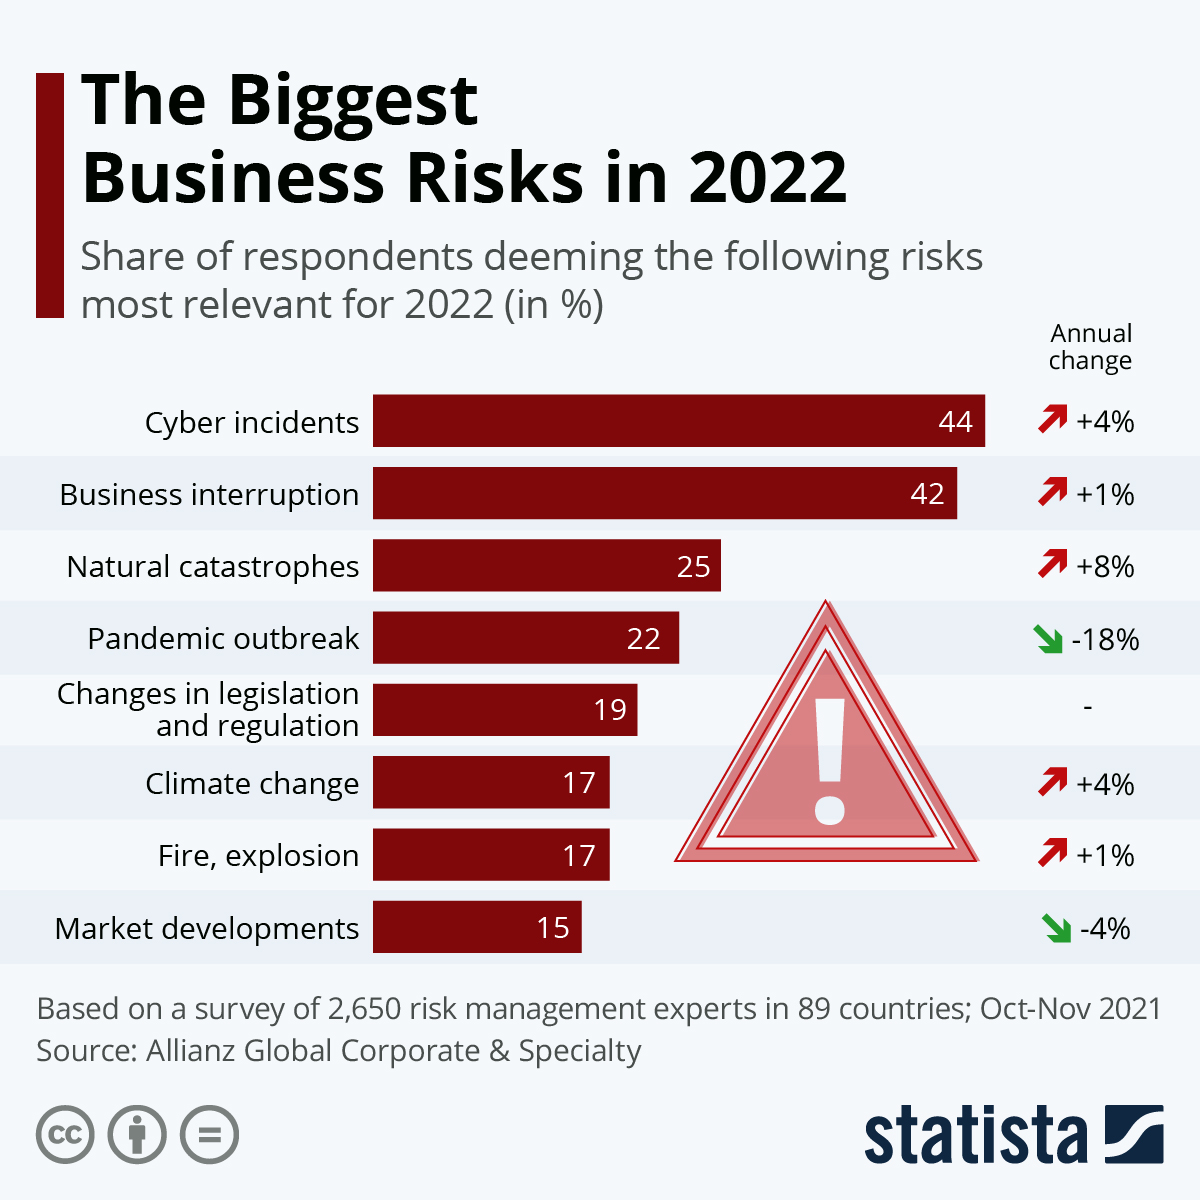 The Biggest Business Risks in 2022